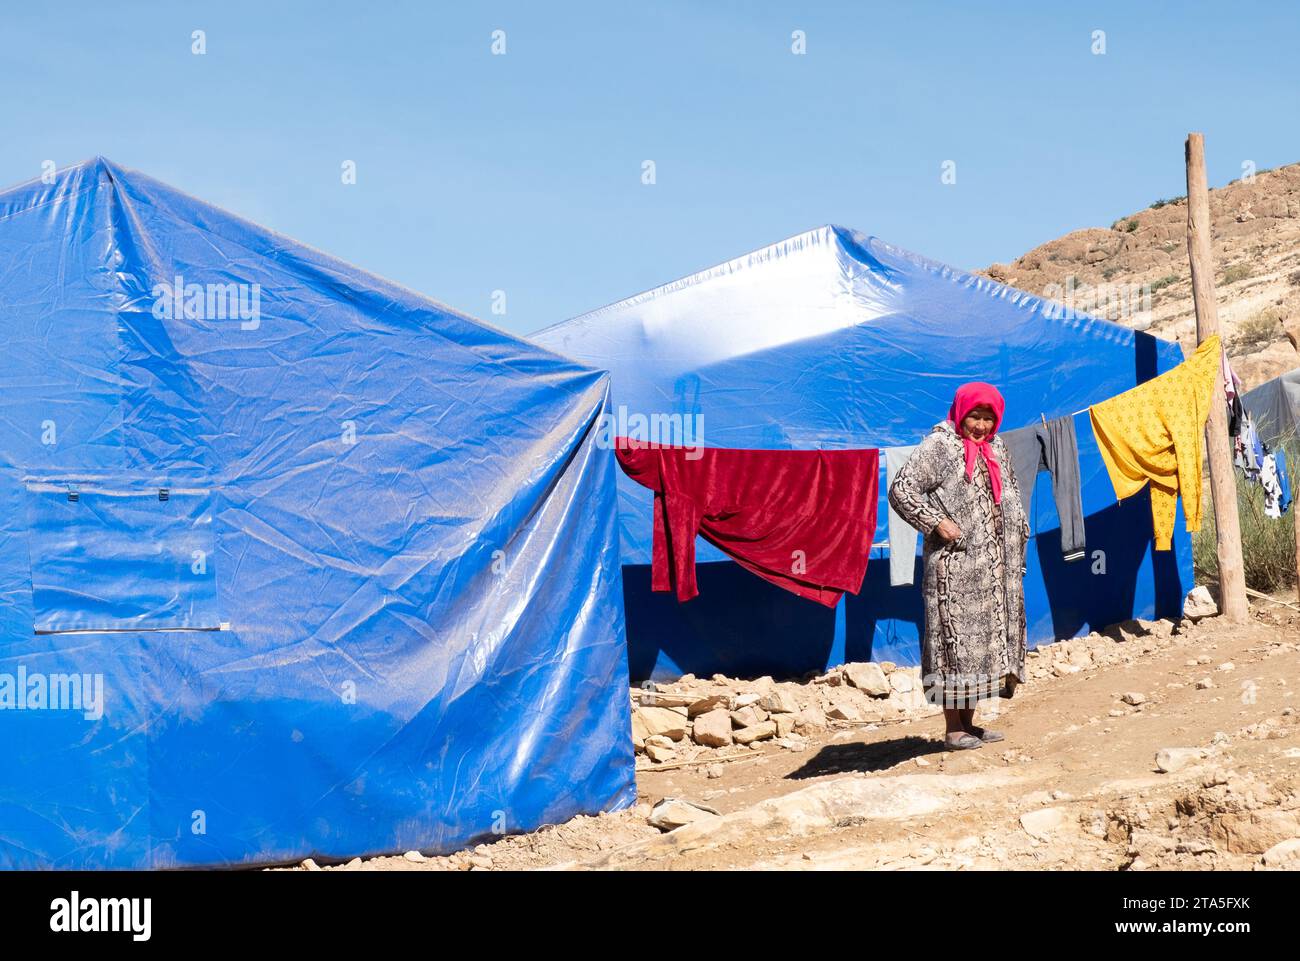 Woman stands outside blue relief tents, Sidi Hssain, Atlas Mountains, Morocco Stock Photo